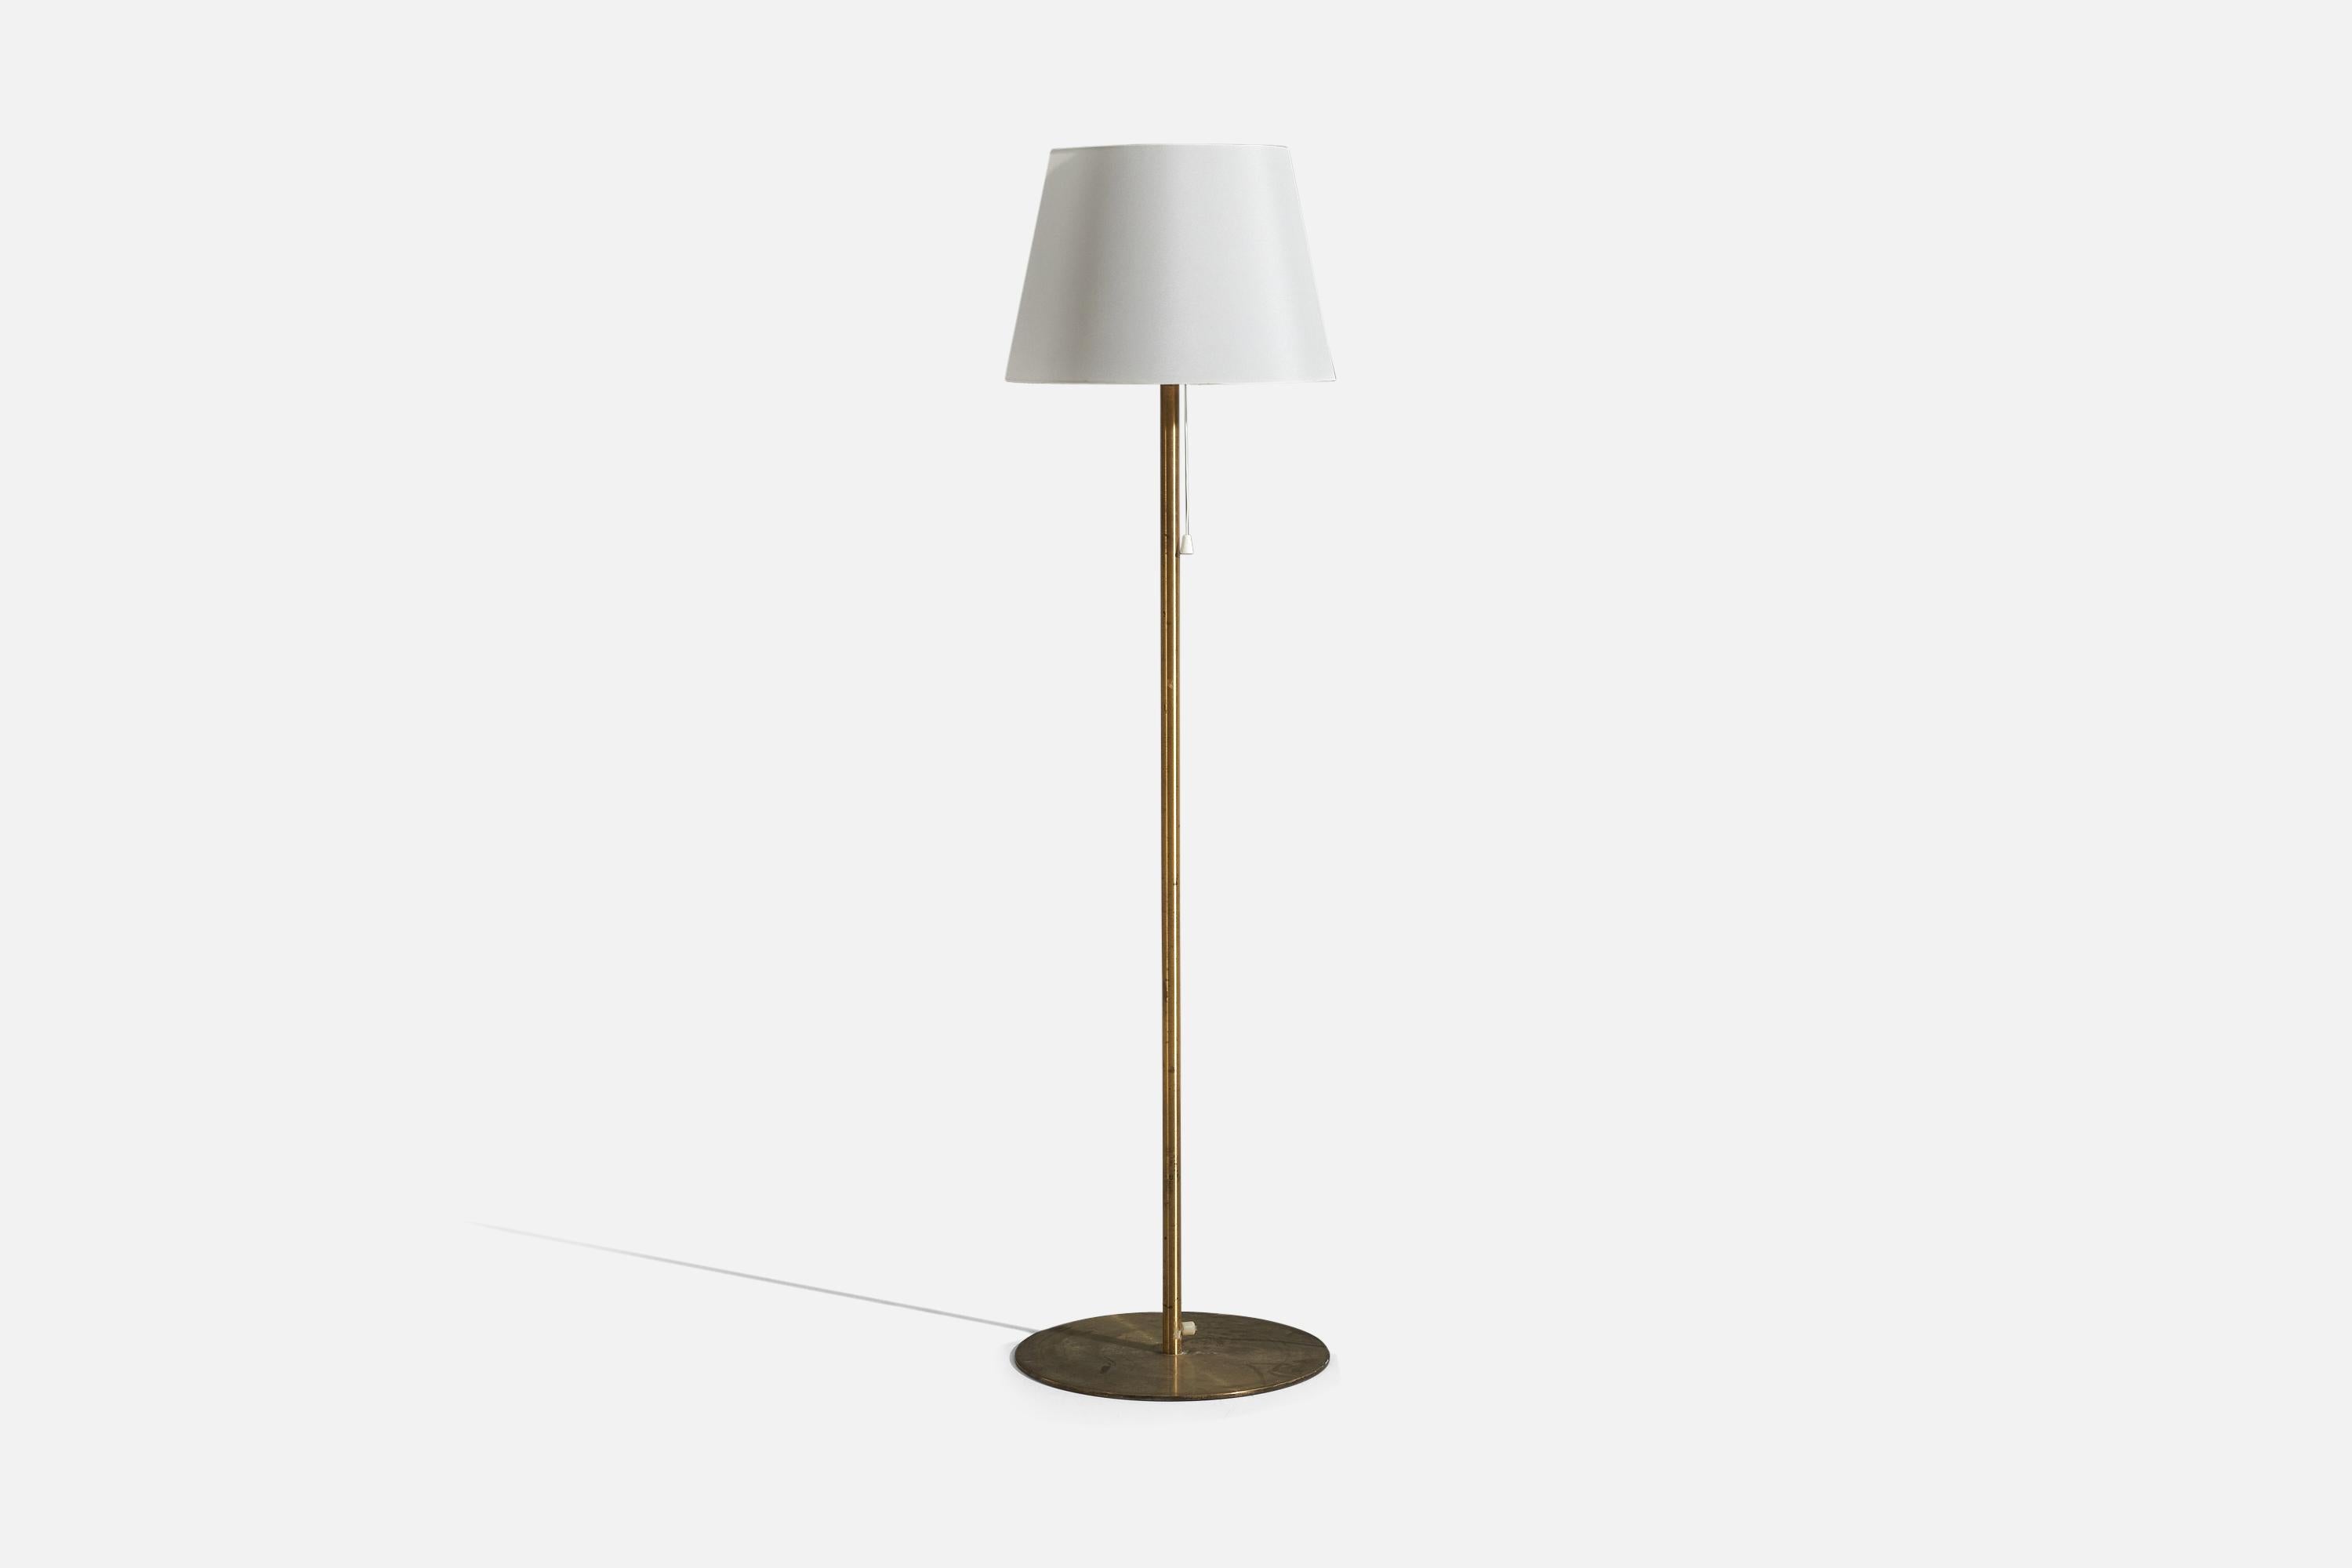 A brass floor lamp with a fabric lampshade, designed and produced by Luxus Vittsjö, Sweden, 1960s.

Sold with Lampshade 
Dimensions of Floor Lamp (inches) : 48.25 x 13.875 x 13.875 (H x W x D)
Dimensions of Shade (inches) : 13 x 15 x 10 (T x B x